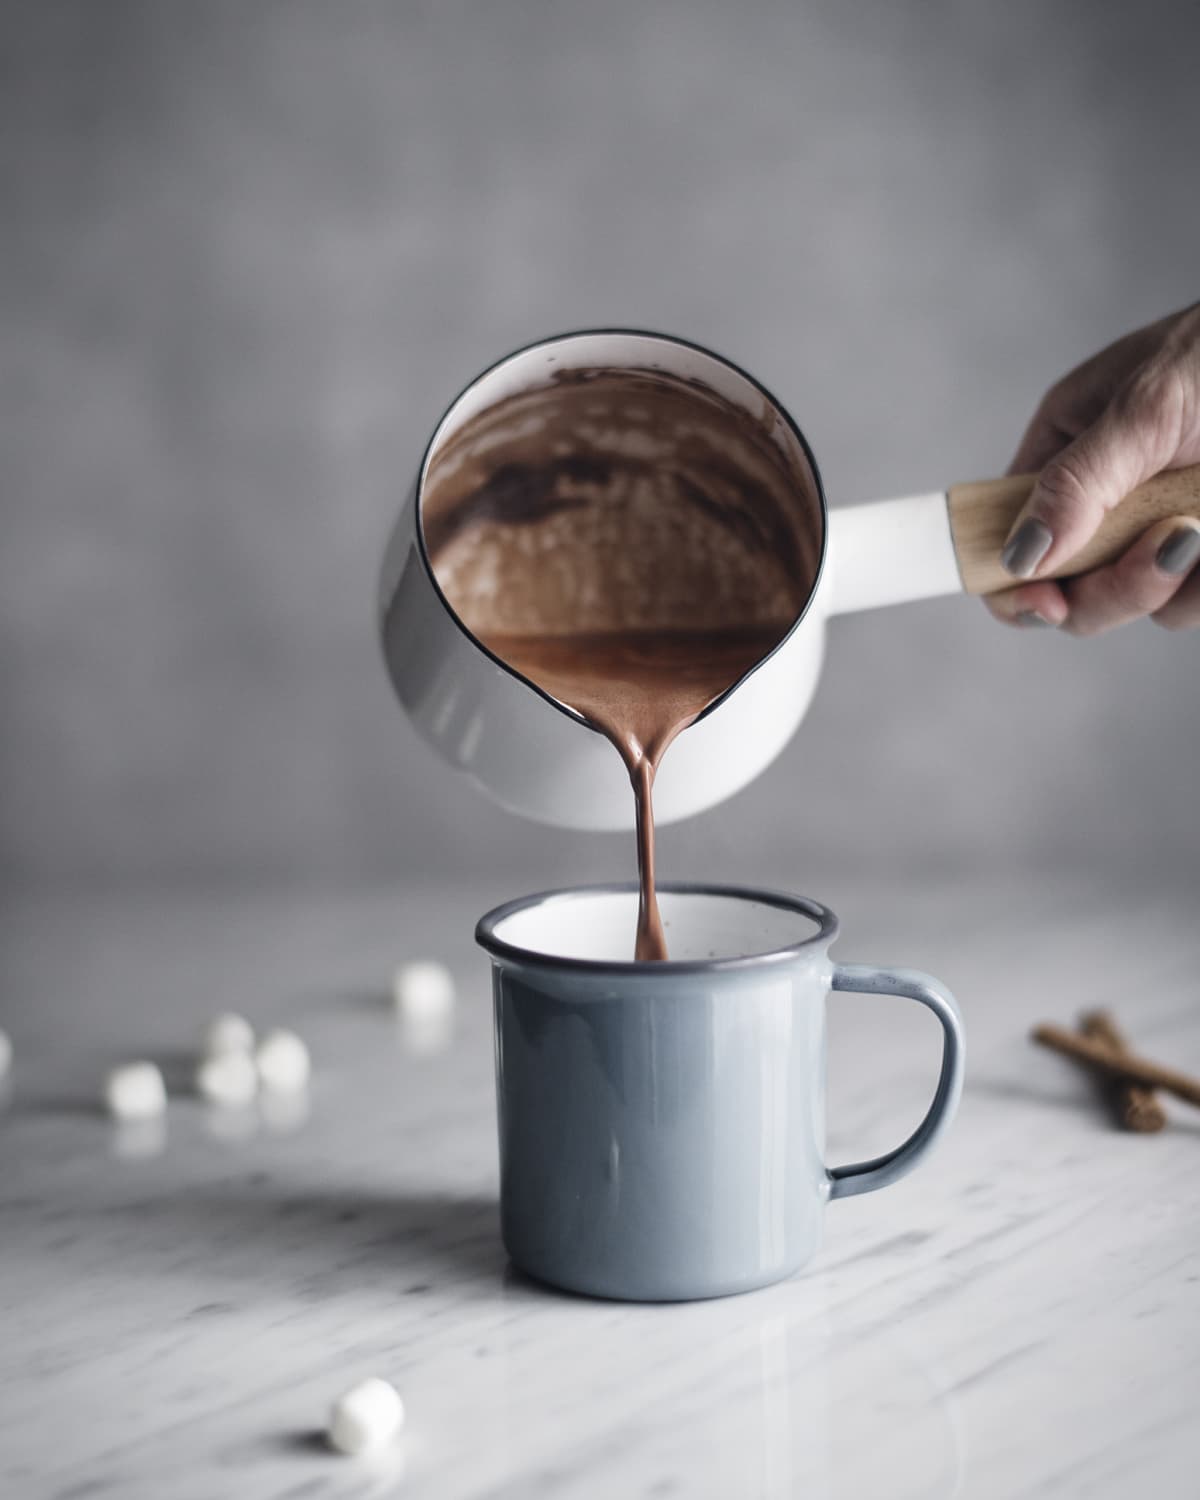 Pouring hot chocolate from pot to mug